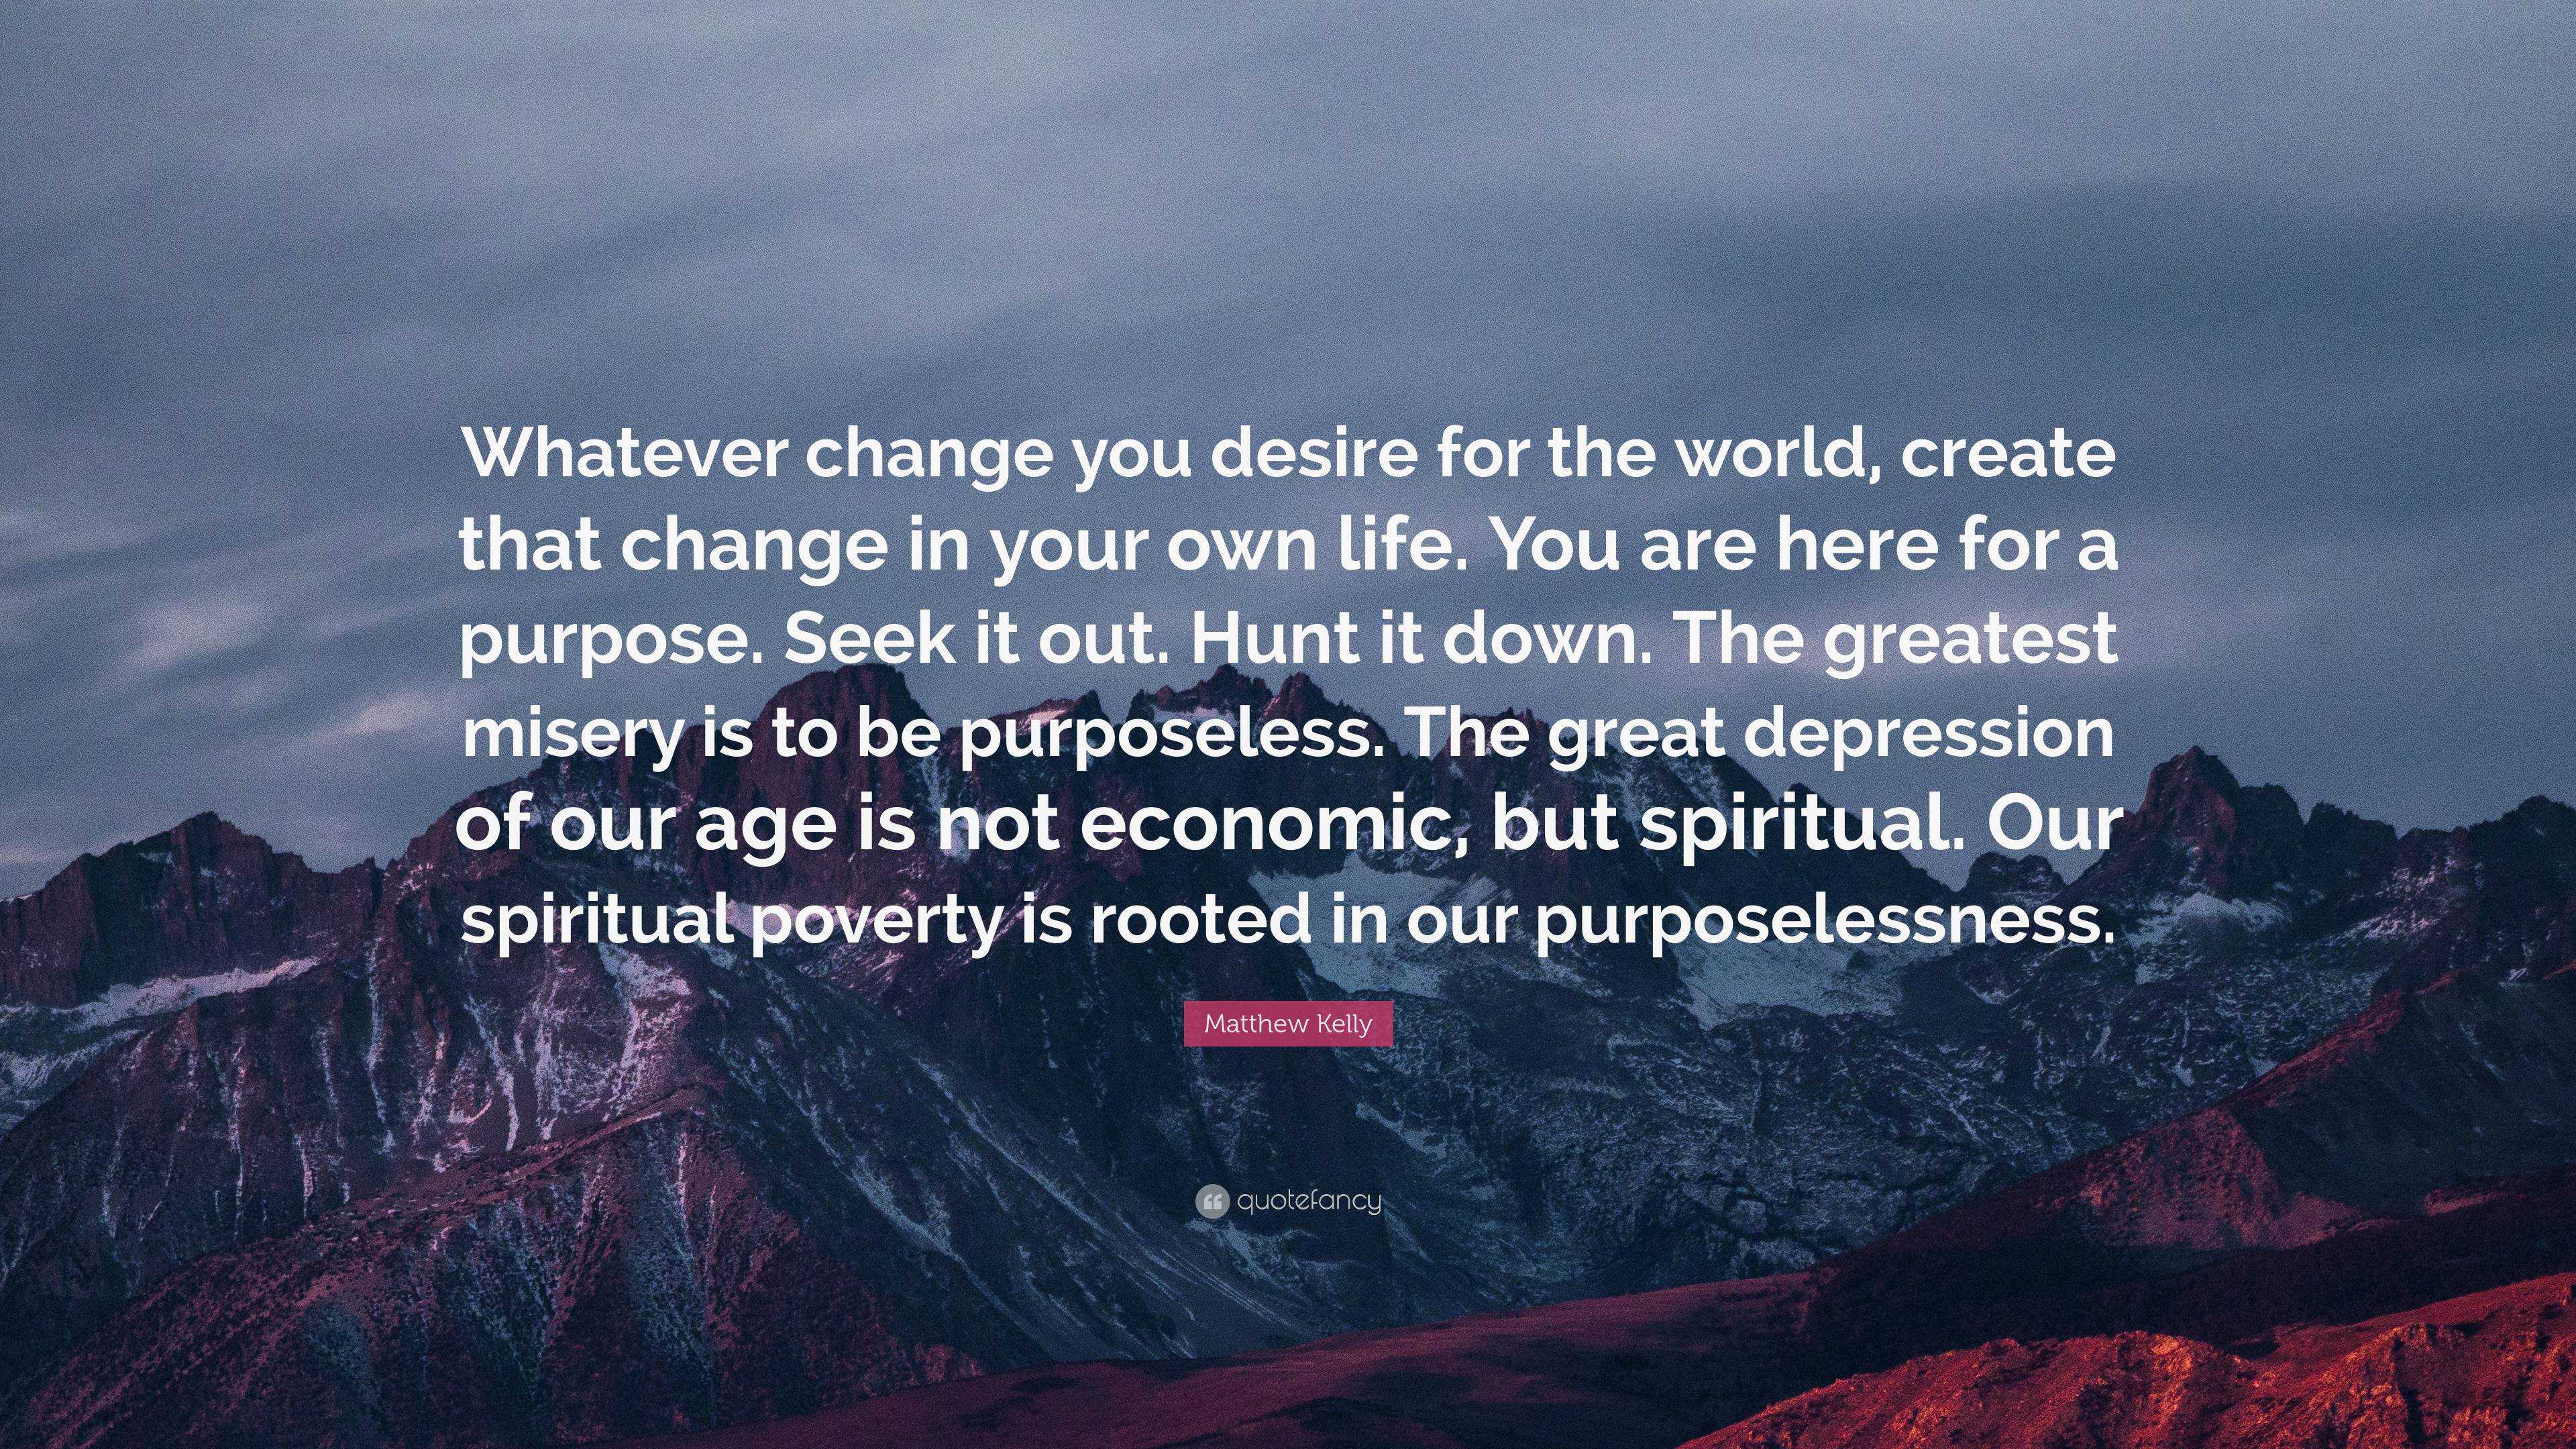 https://quotefancy.com/media/wallpaper/3840x2160/6662277-Matthew-Kelly-Quote-Whatever-change-you-desire-for-the-world.jpg